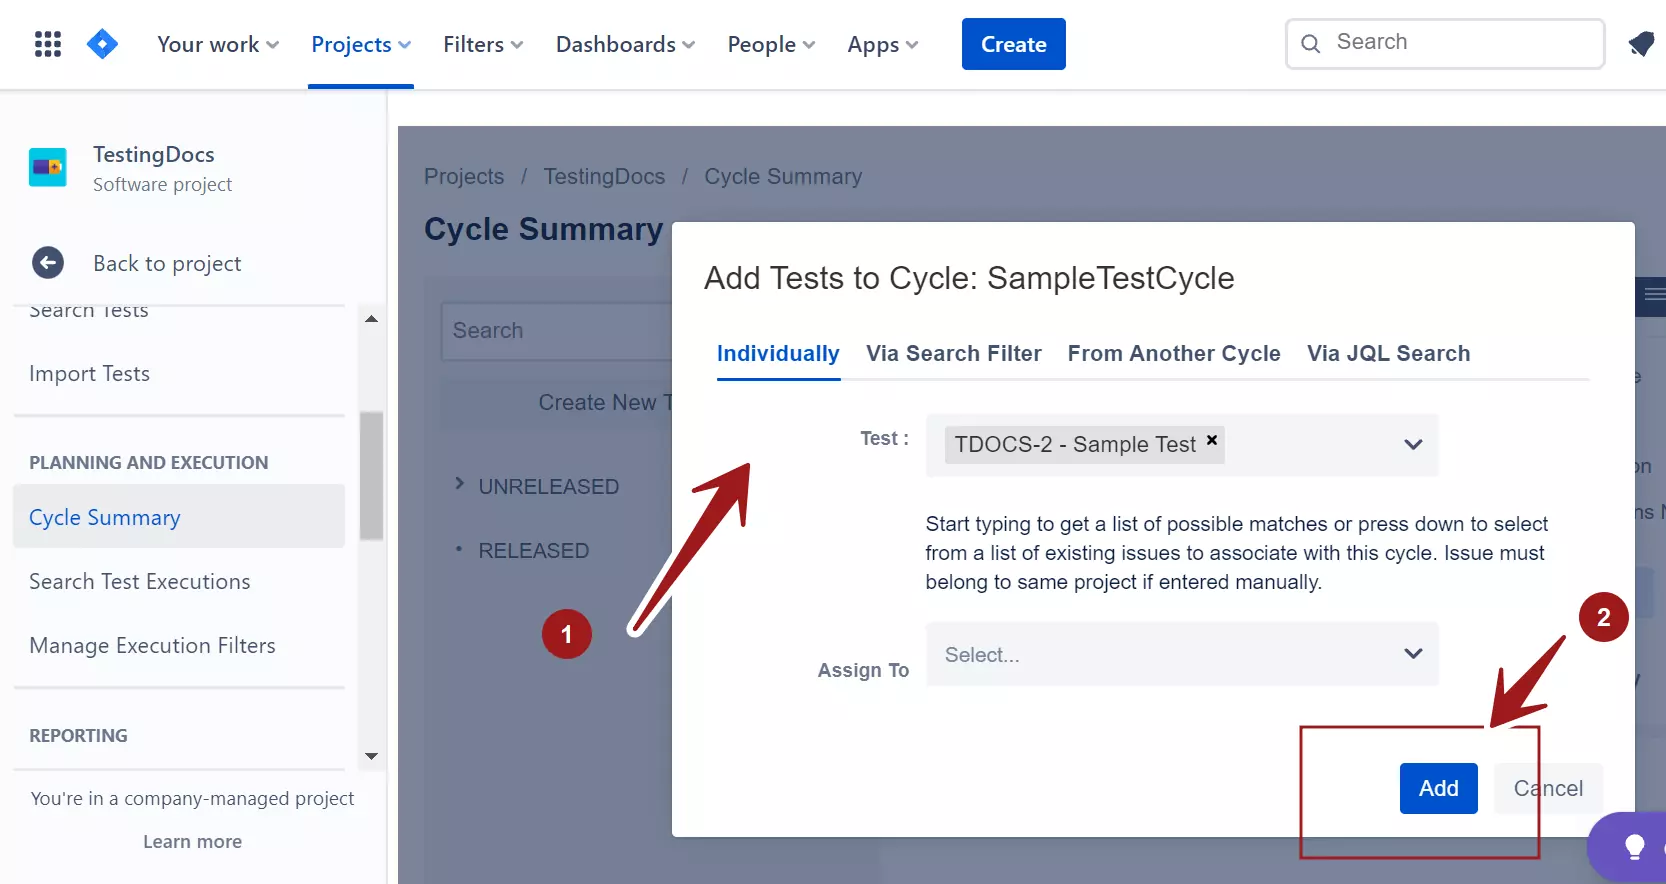 Add Tests to Cycle